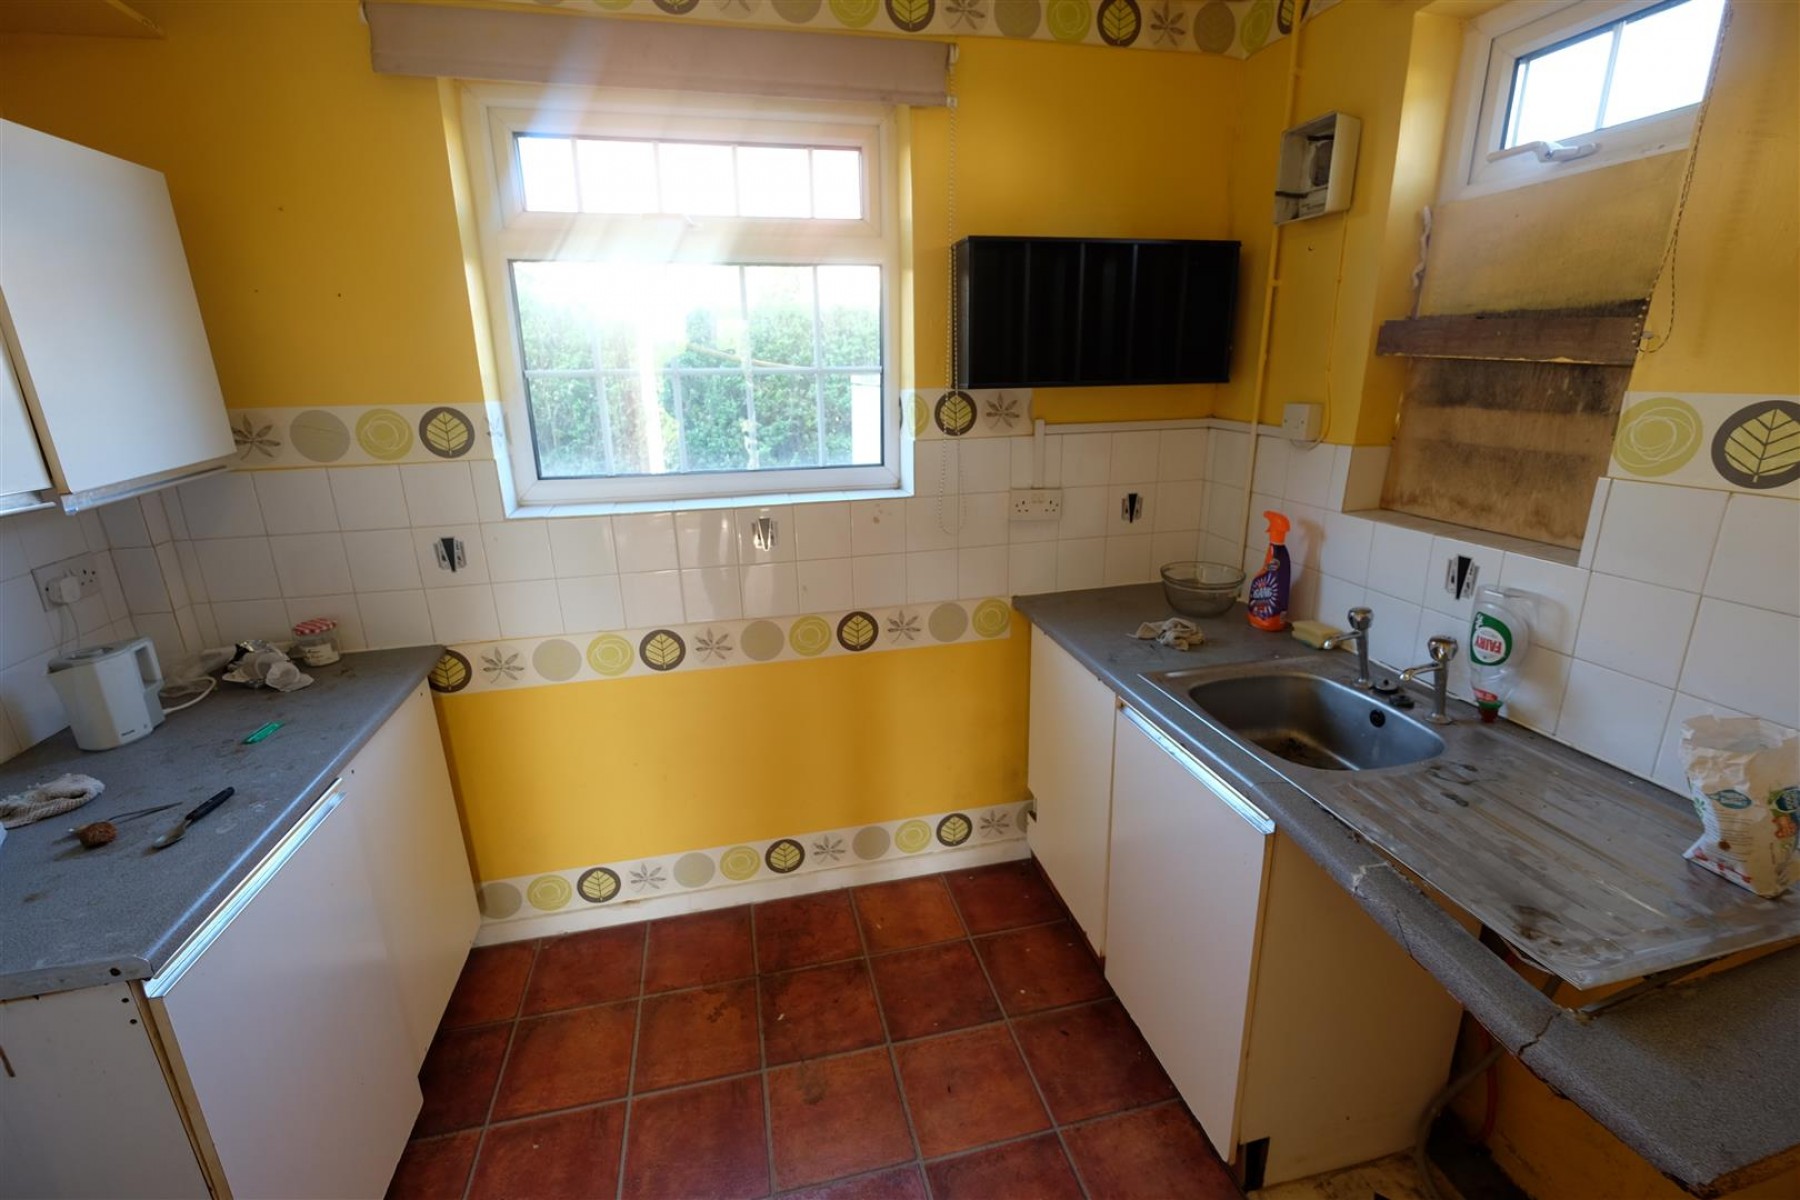 Images for *** REDUCED PRICE *** 16 Ashcroft Road, Sea Mills, Bristol